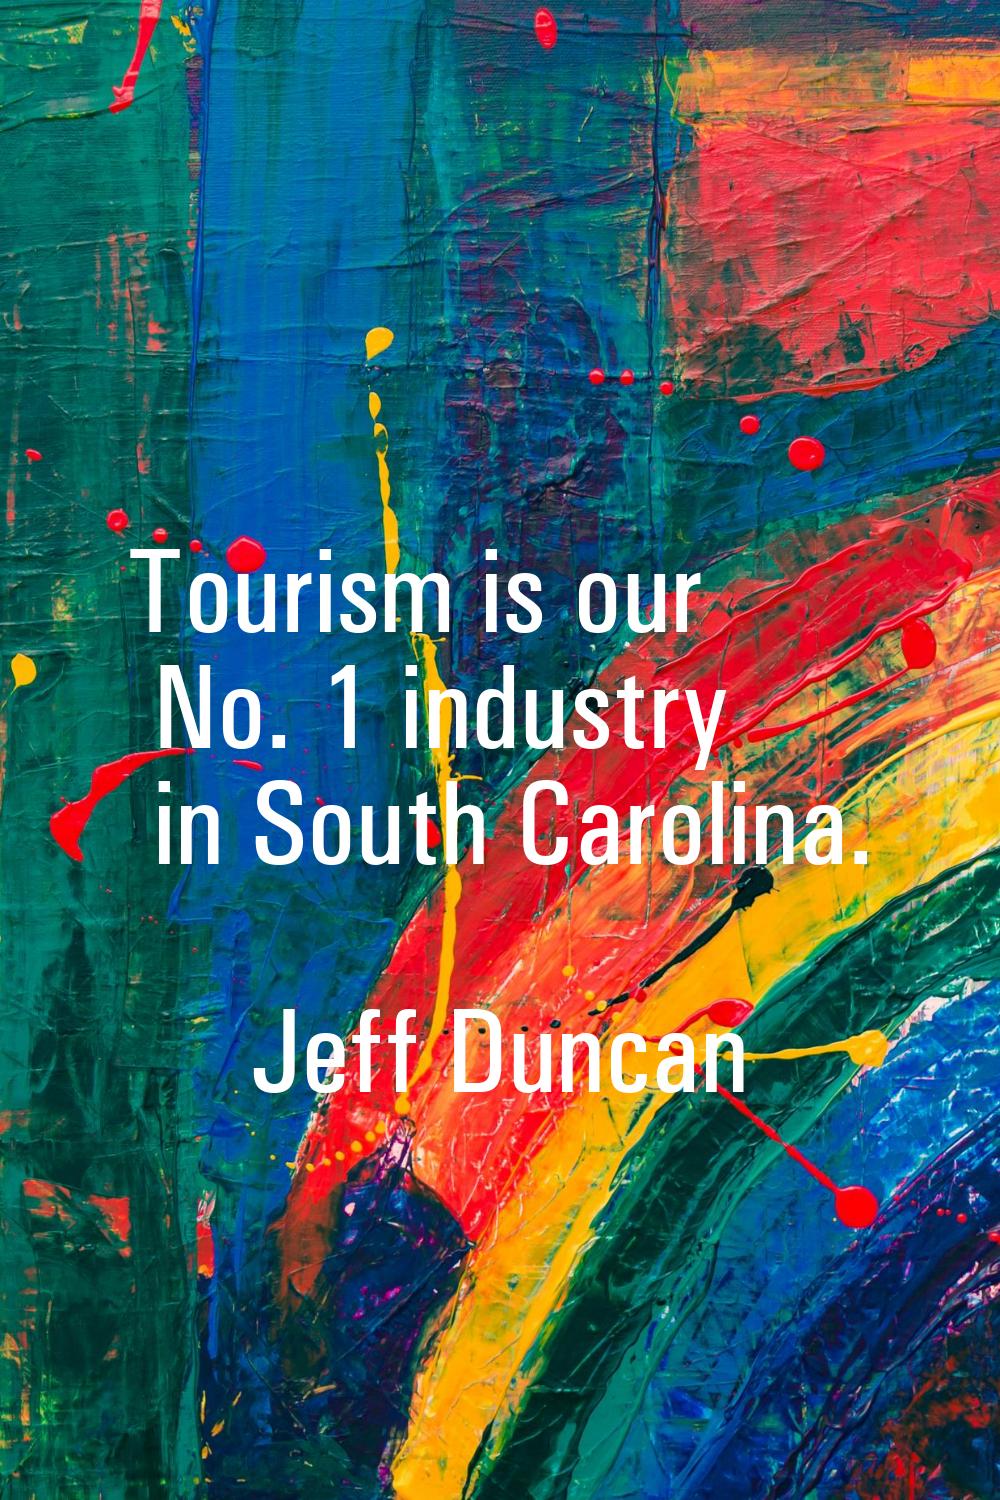 Tourism is our No. 1 industry in South Carolina.